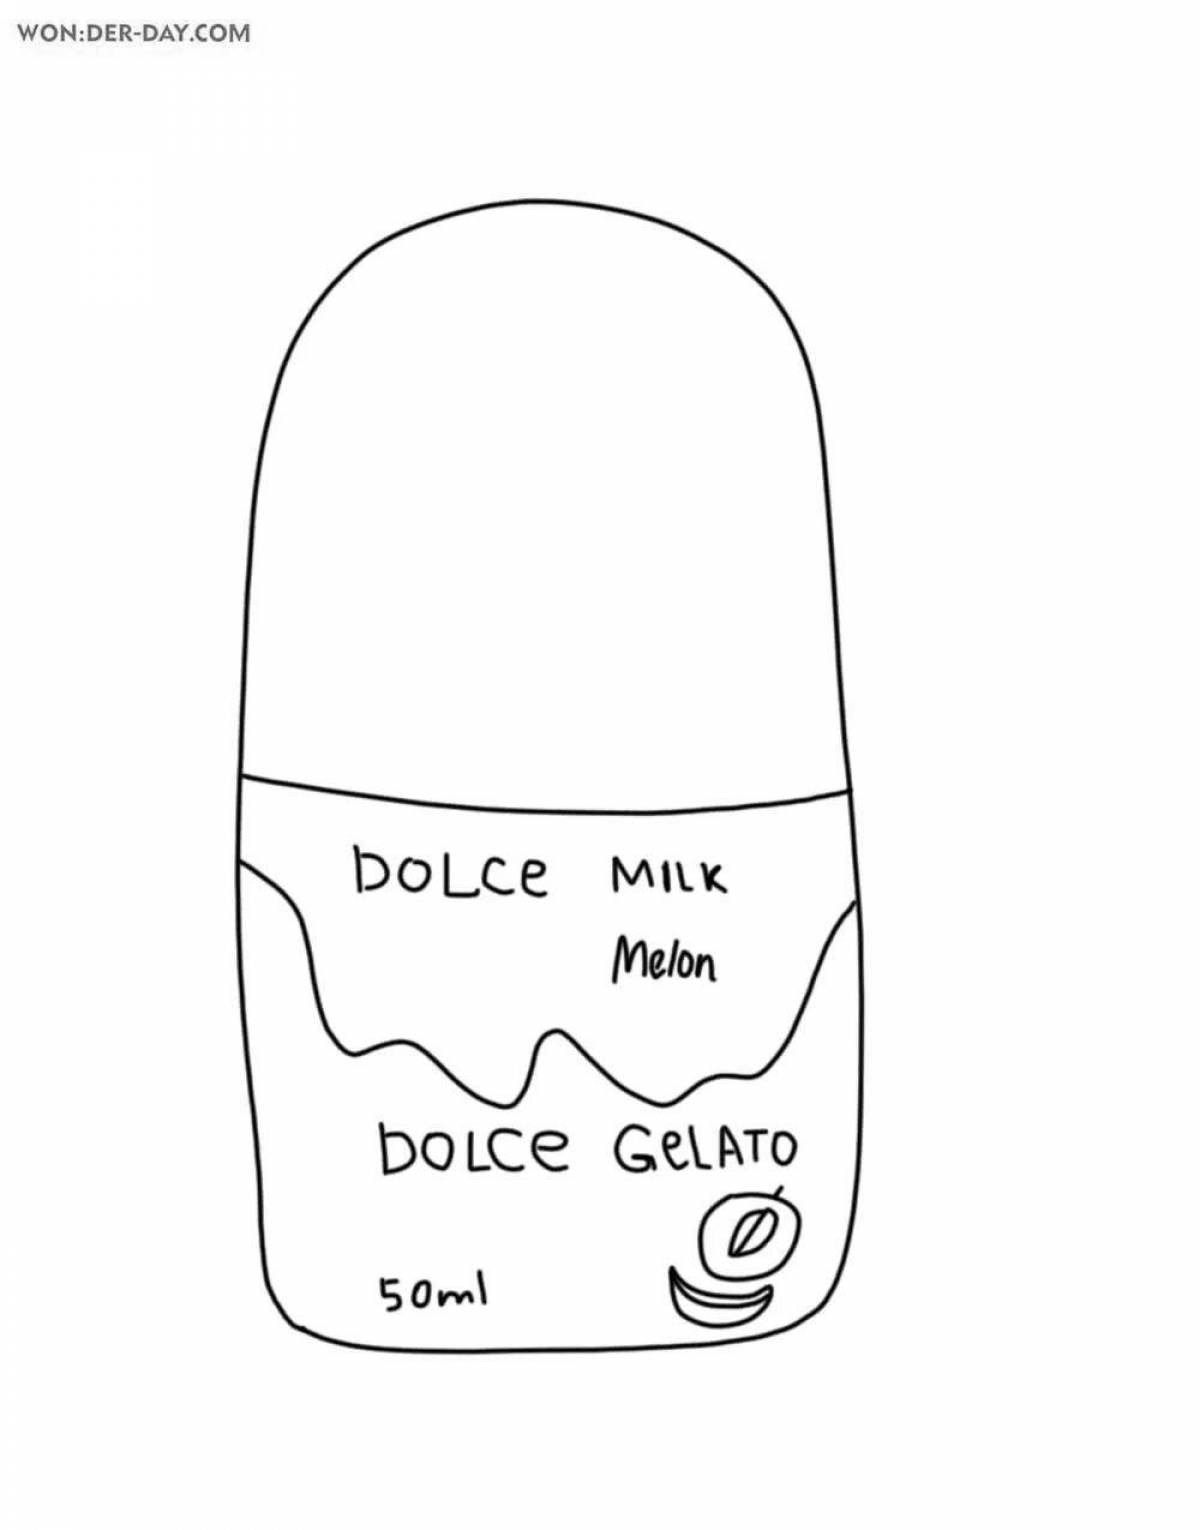 Dolce milk coloring page bright